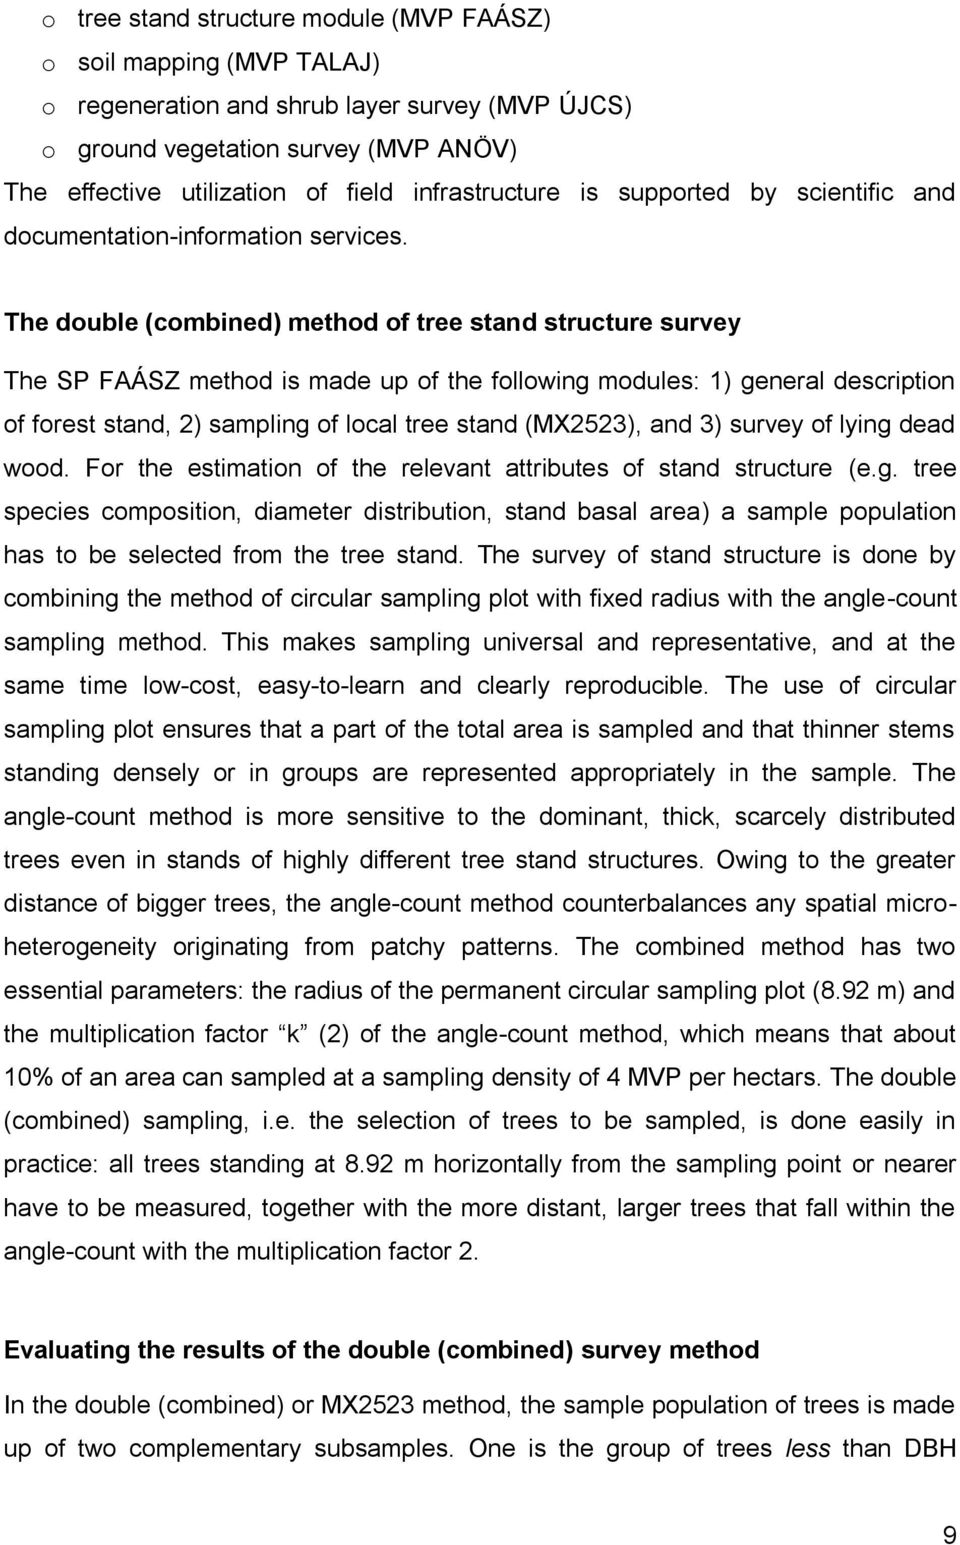 The double (combined) method of tree stand structure survey The SP FAÁSZ method is made up of the following modules: 1) general description of forest stand, 2) sampling of local tree stand (MX2523),